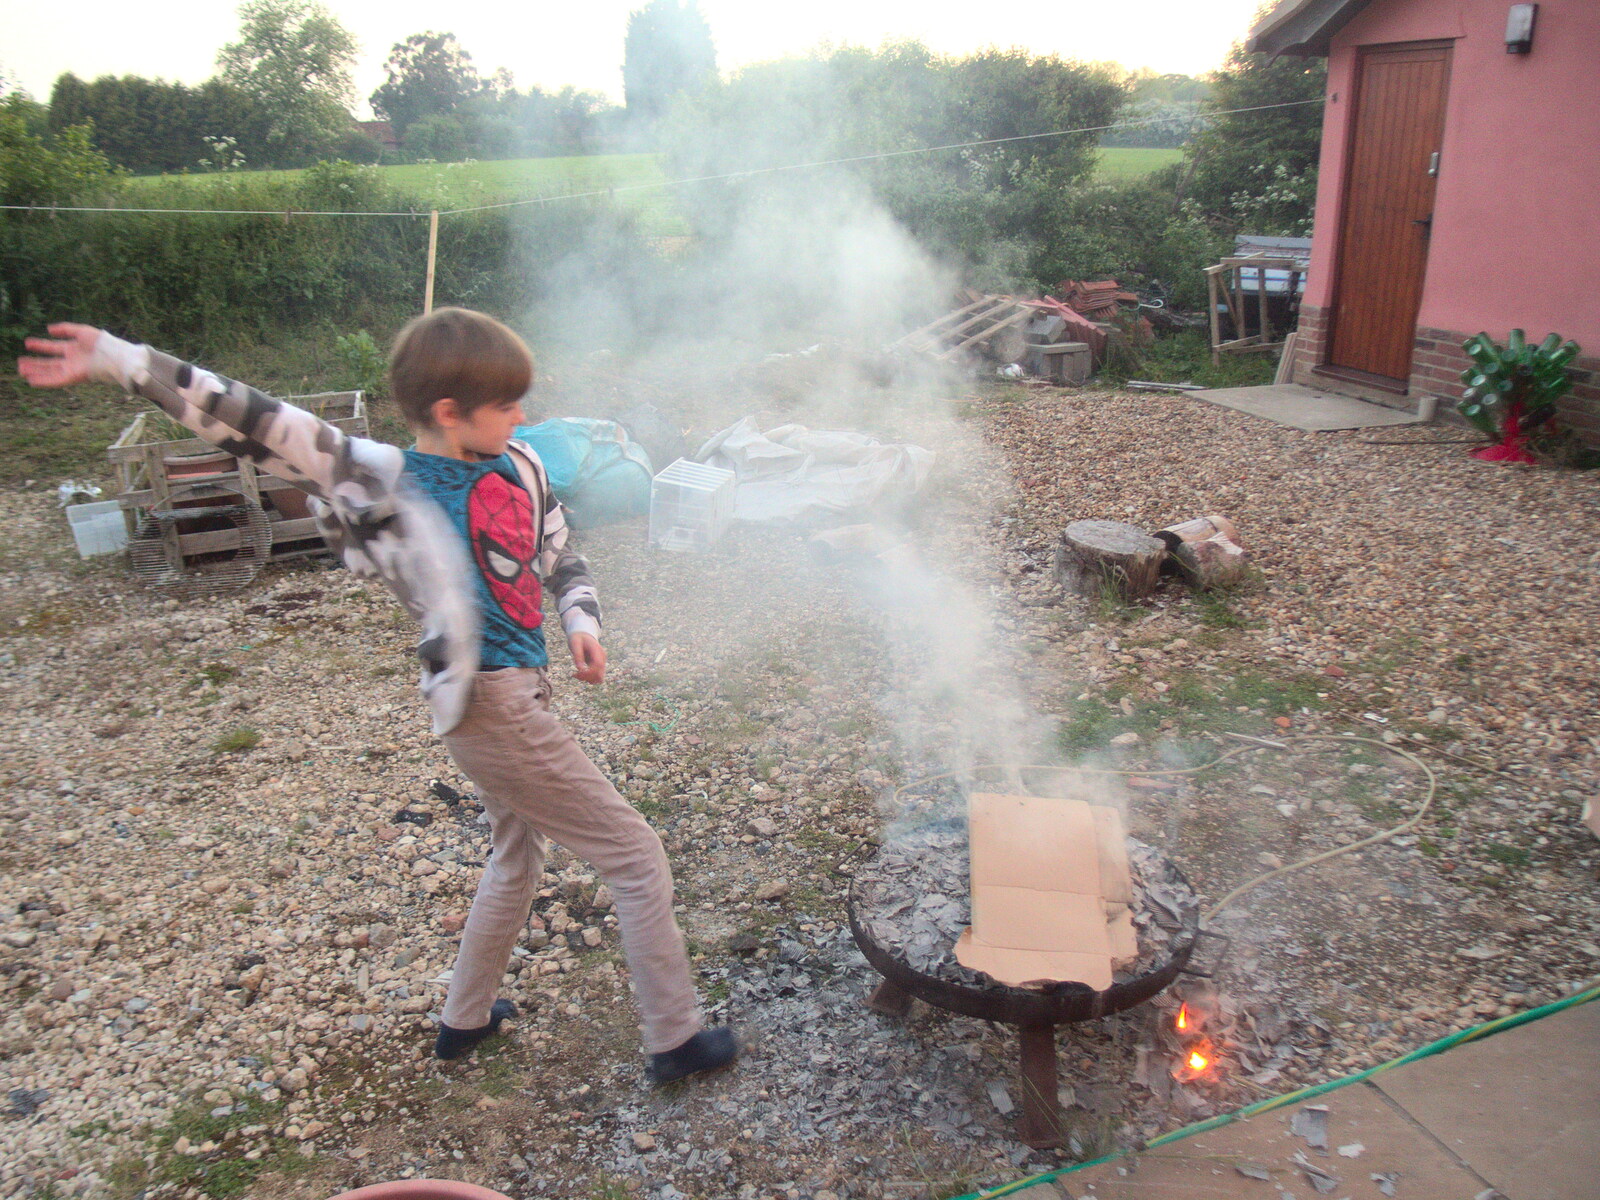 Harry does some moves around the smoke from Garden Centres, and Hamish Visits, Brome, Suffolk - 28th May 2021